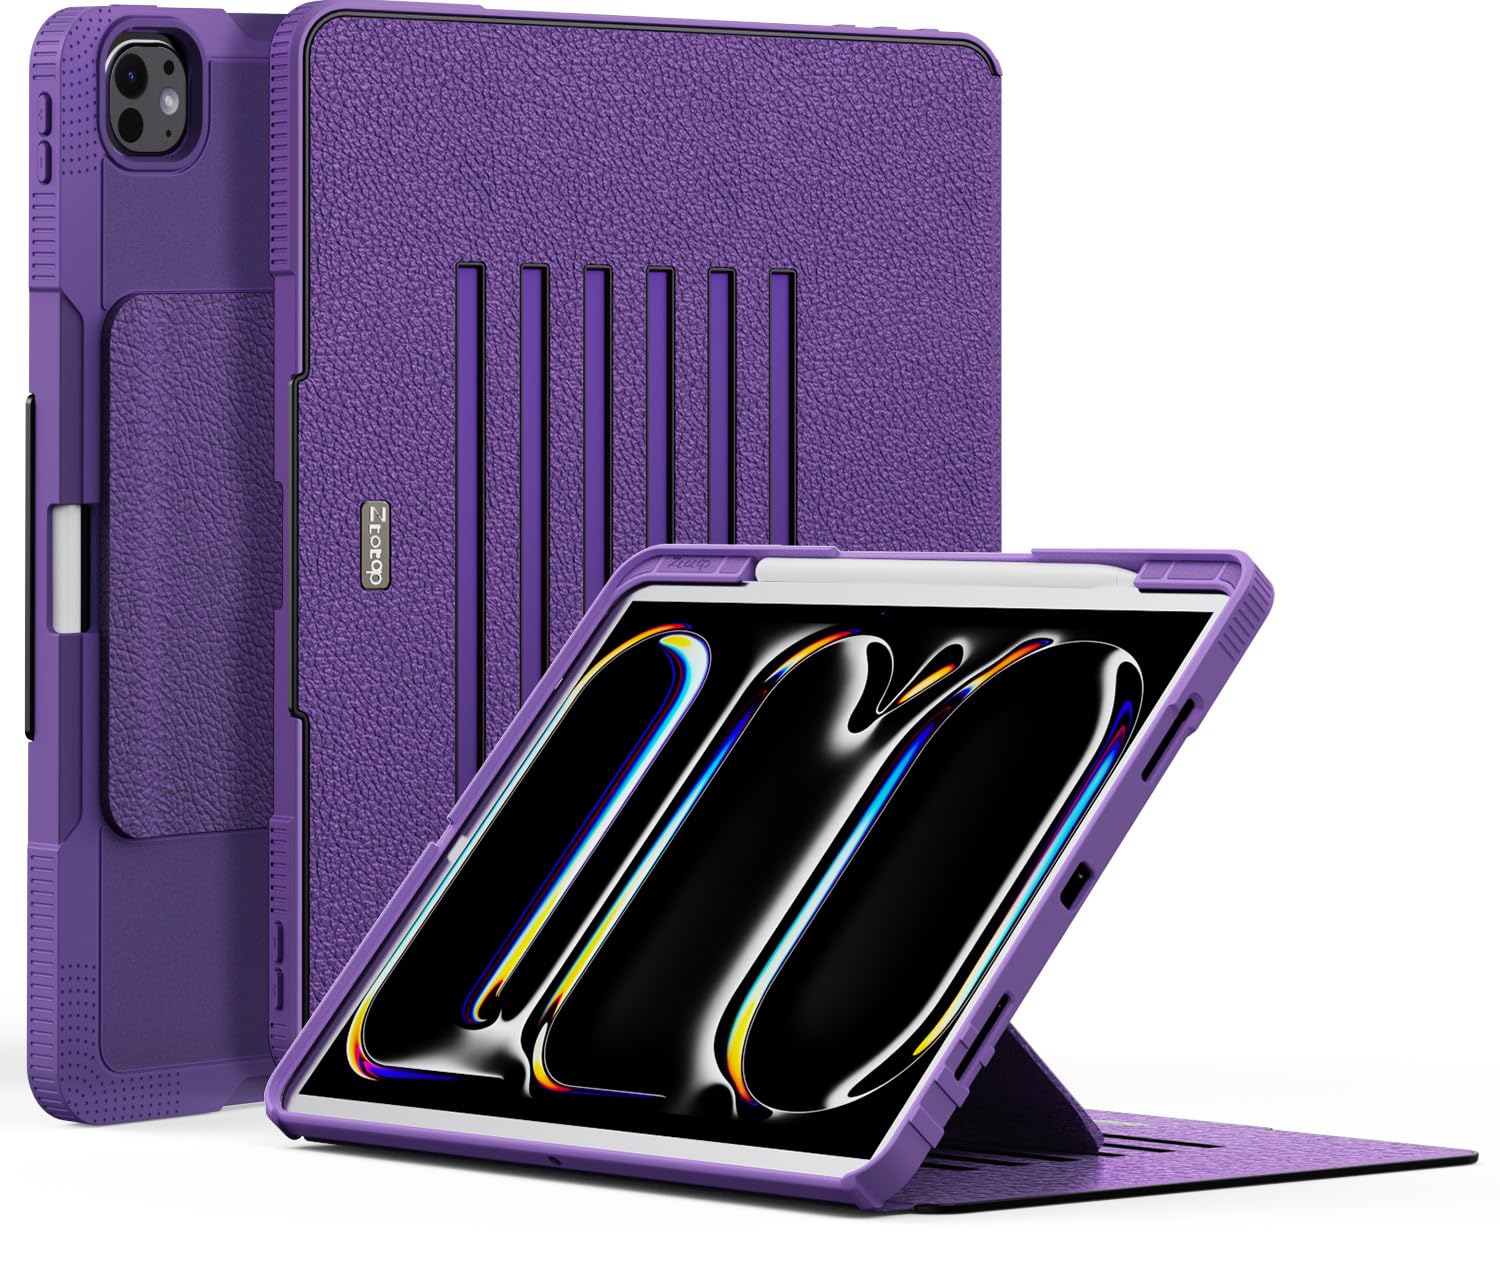 ZtotopCases for New iPad Pro 12.9 Inch Case 2022/2021/2020 6th/5th/4th Generation, [6 Magnetic Stand] Full Protective Cover for iPad Pro 12.9", Purple